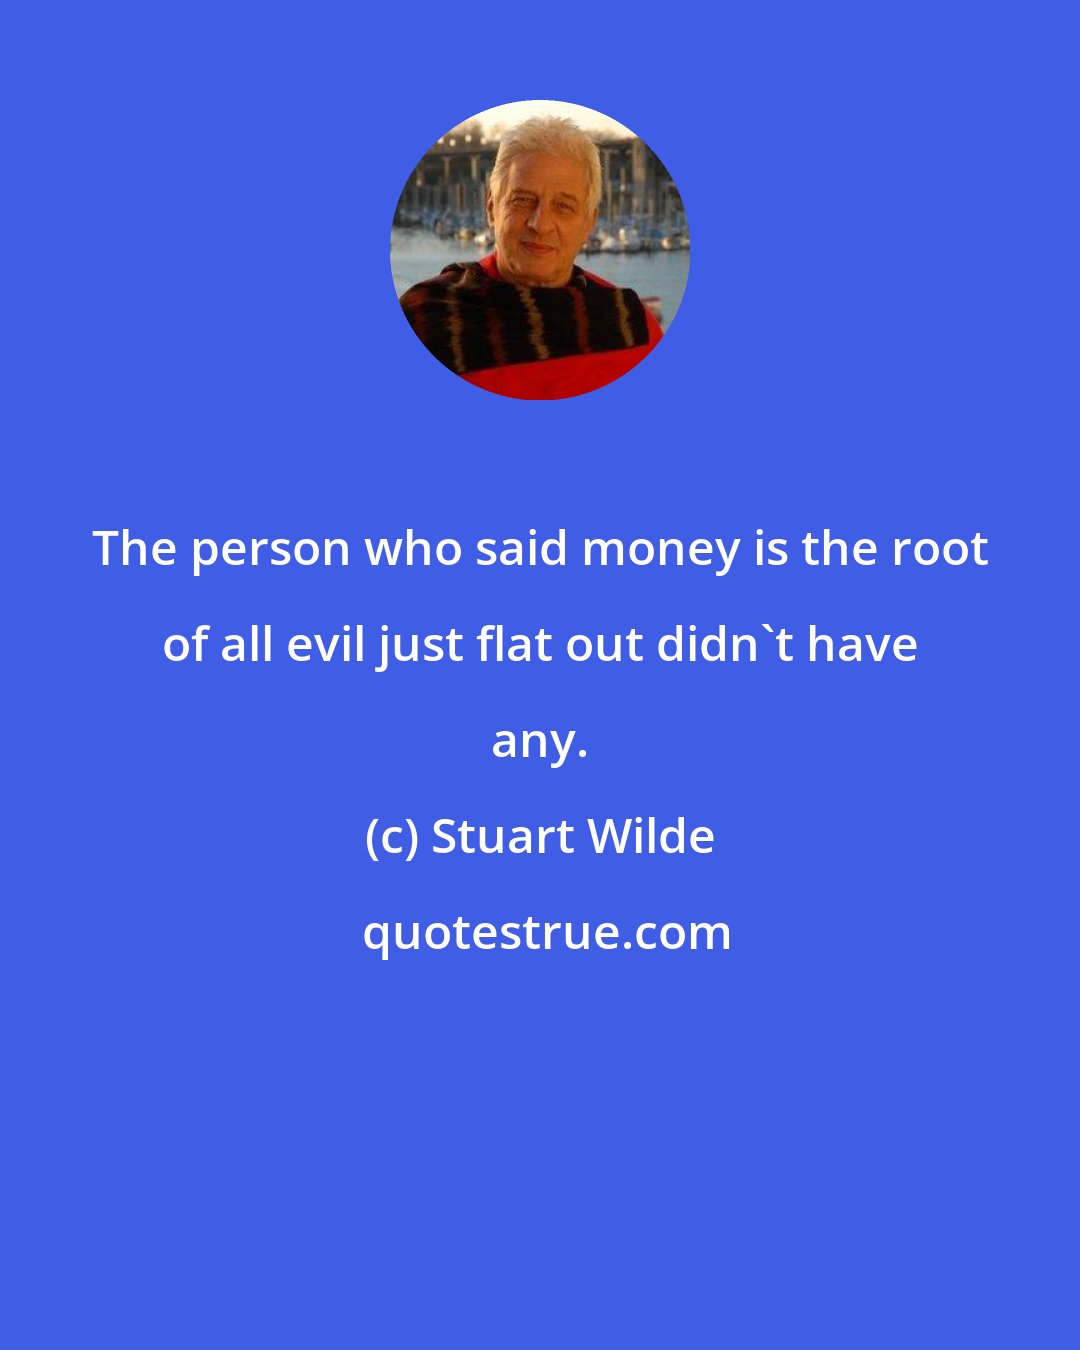 Stuart Wilde: The person who said money is the root of all evil just flat out didn't have any.